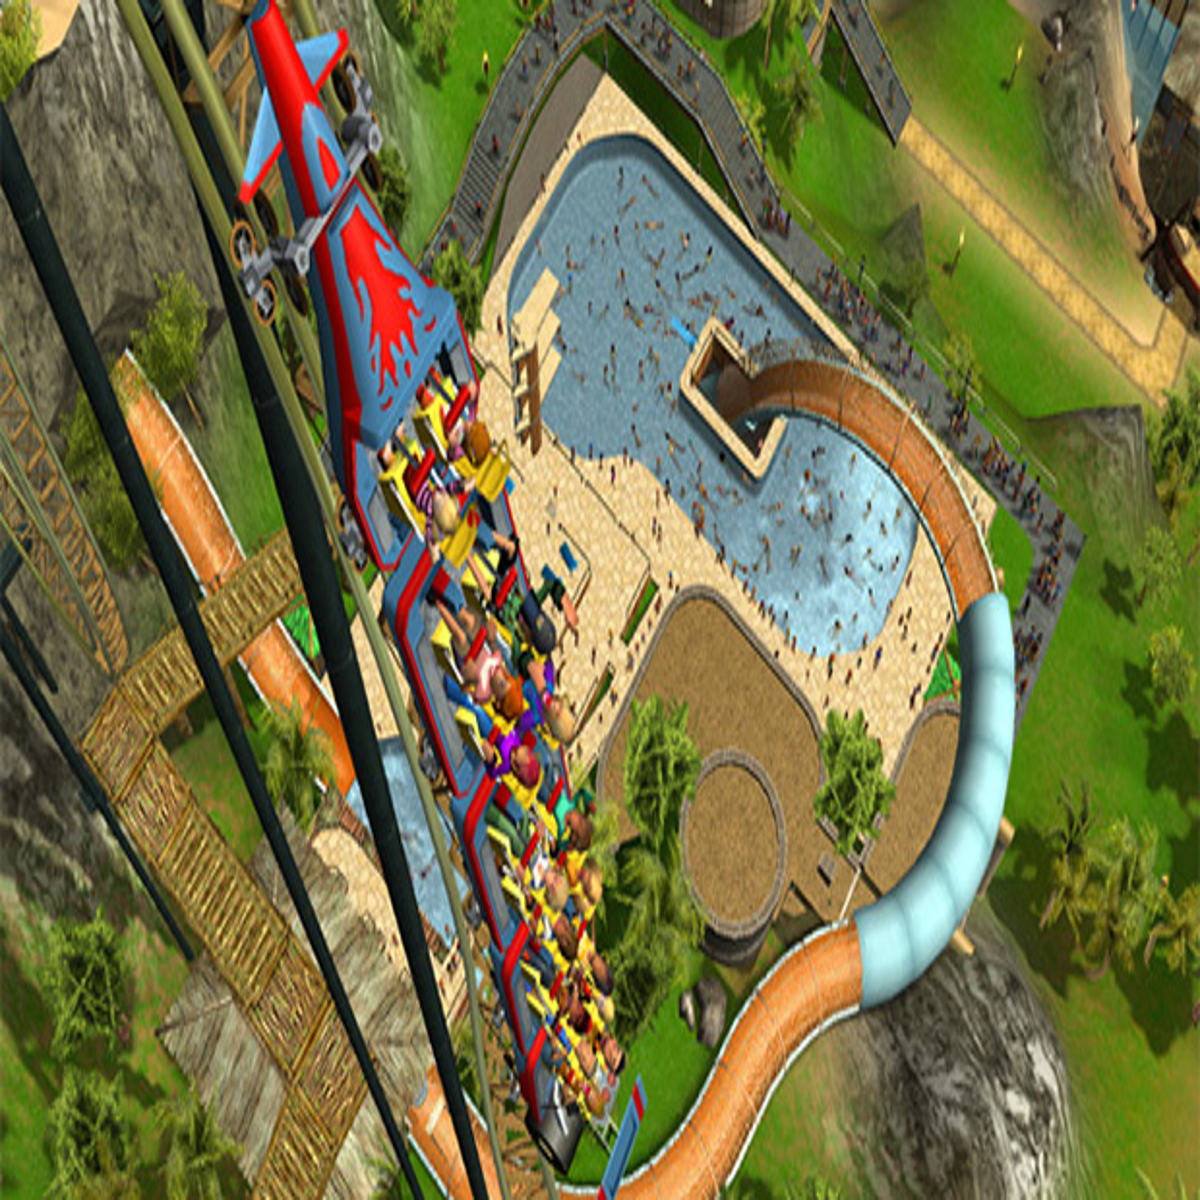 Rollercoaster Tycoon 3 returns with a Complete Edition this month